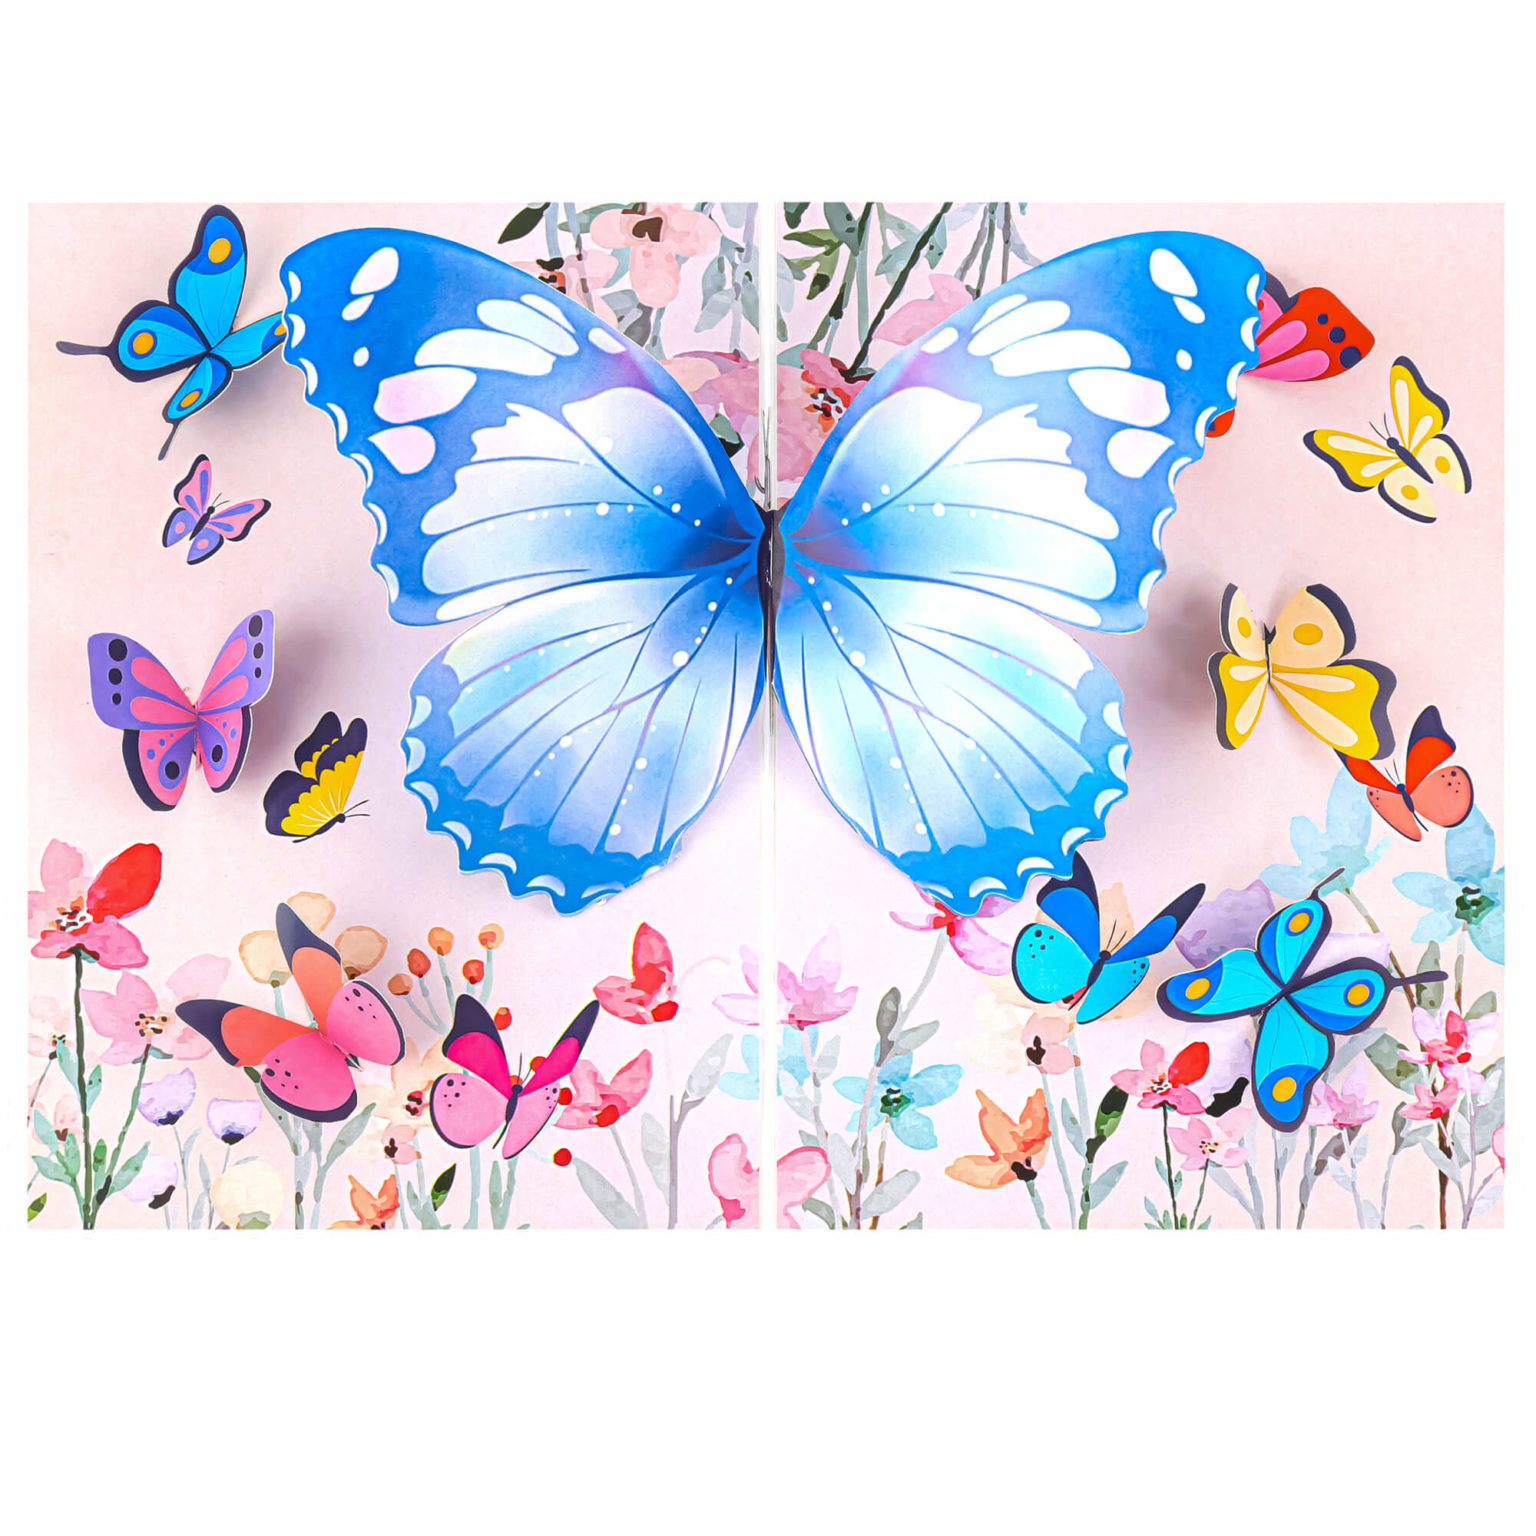 Butterflies-Wild-Flower-Pop-Up-Card-overview-wholesale-manufacture-custom-design-custom-mothers-day-card-pop-up-easter-cards